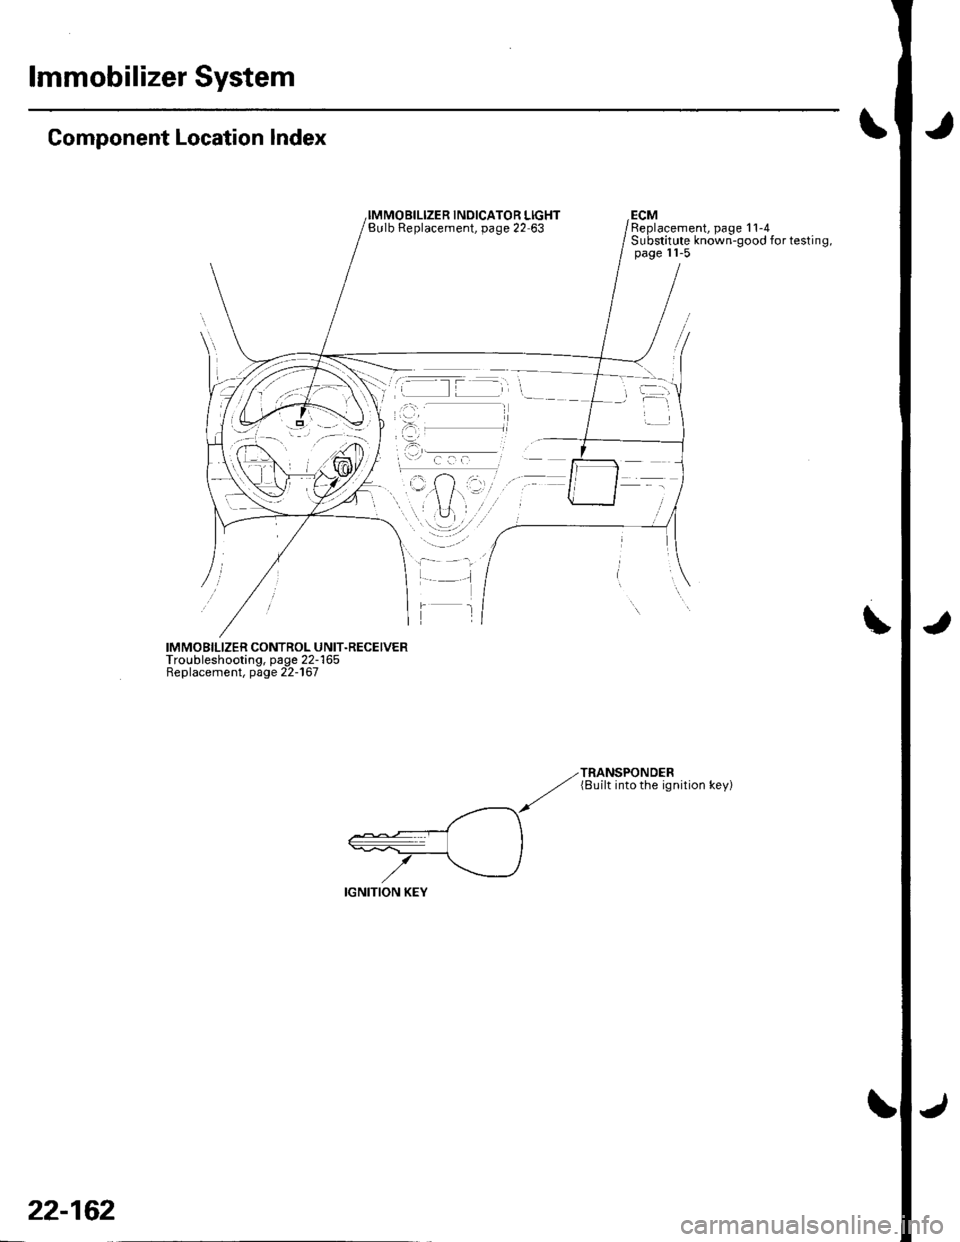 HONDA CIVIC 2003 7.G Workshop Manual lmmobilizer System
Component Location Index
INOICATOR LIGHTBulb Replacement, page 22 63ECMReplacement, page 11-4Substitute known-good for testing,page 11-5
IMMOBILIZER CONTROL UNIT.RECEIVERTroubleshoo